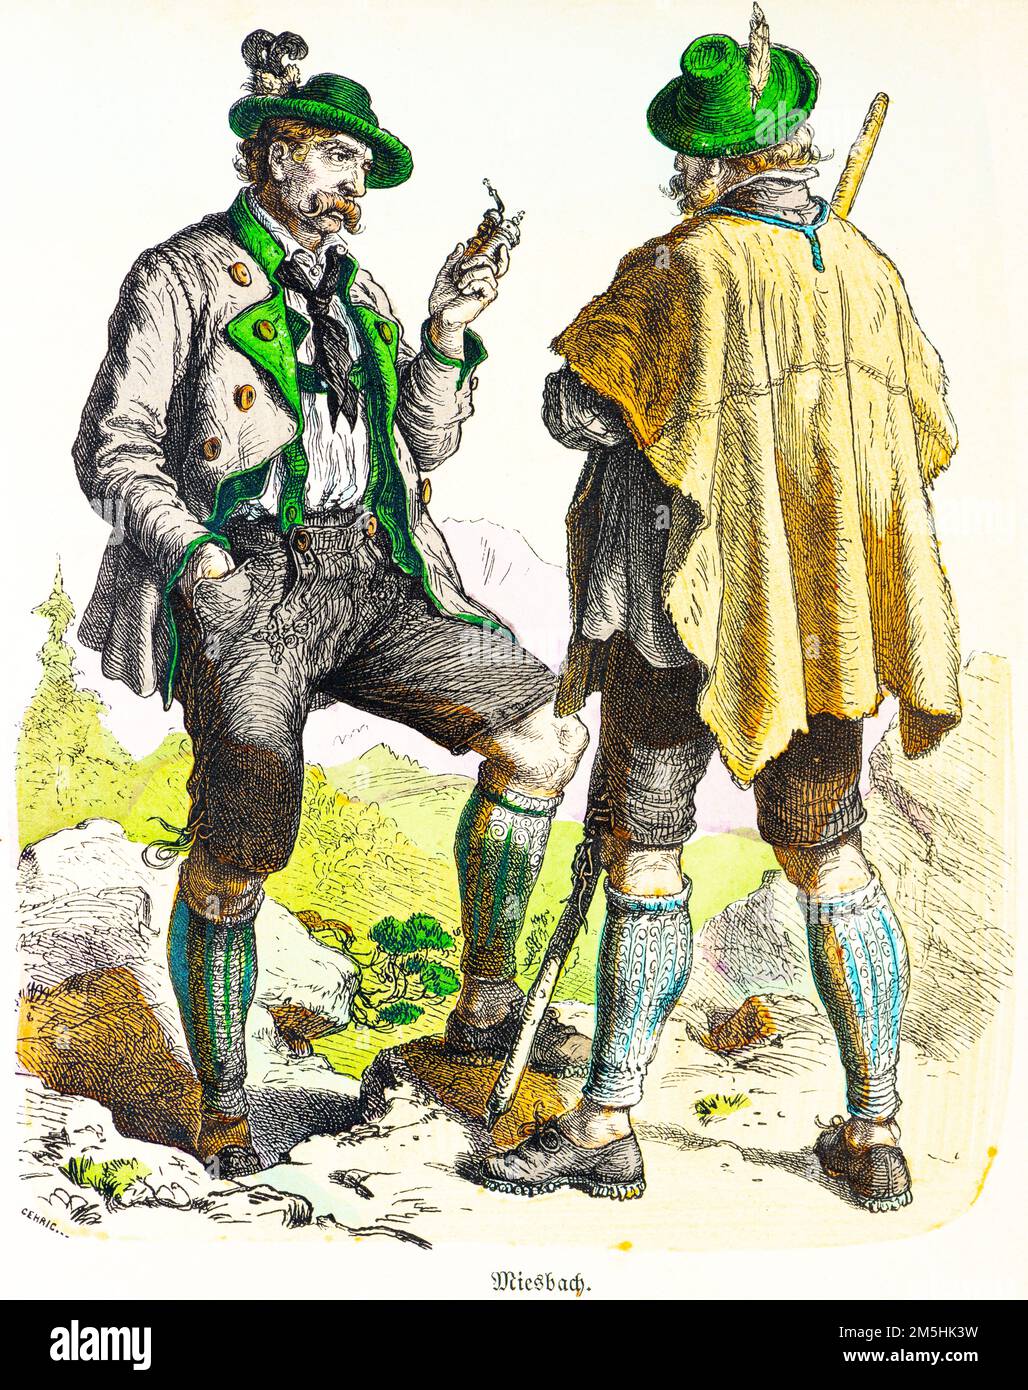 Traditional costumes of Miesbach, Bavaria, Southern Germany, 19th century, ccolured historische Illustration 1890, Münchener Bilderbogen 1890 Stock Photo